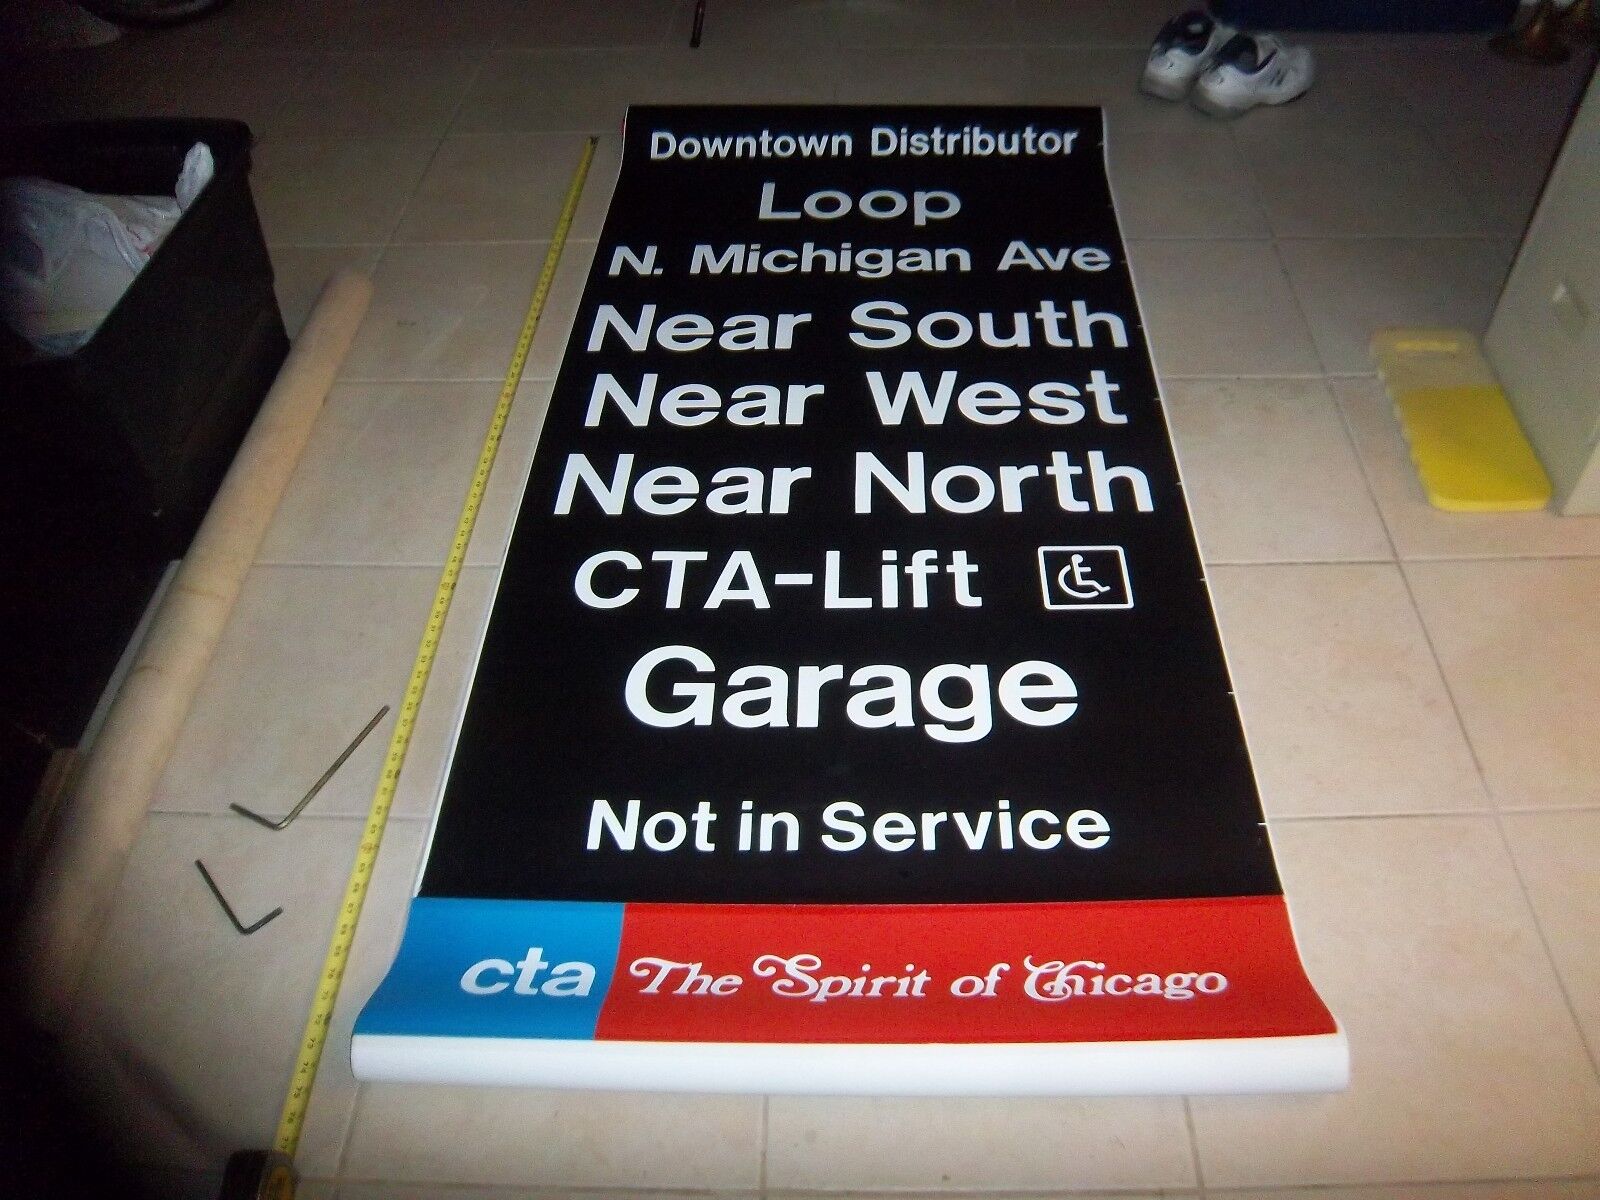 15 FT LONG CHICAGO SUBWAY ROLL SIGN CTA SOLDIER FIELD I OF U MEDICAL CENTER NIS